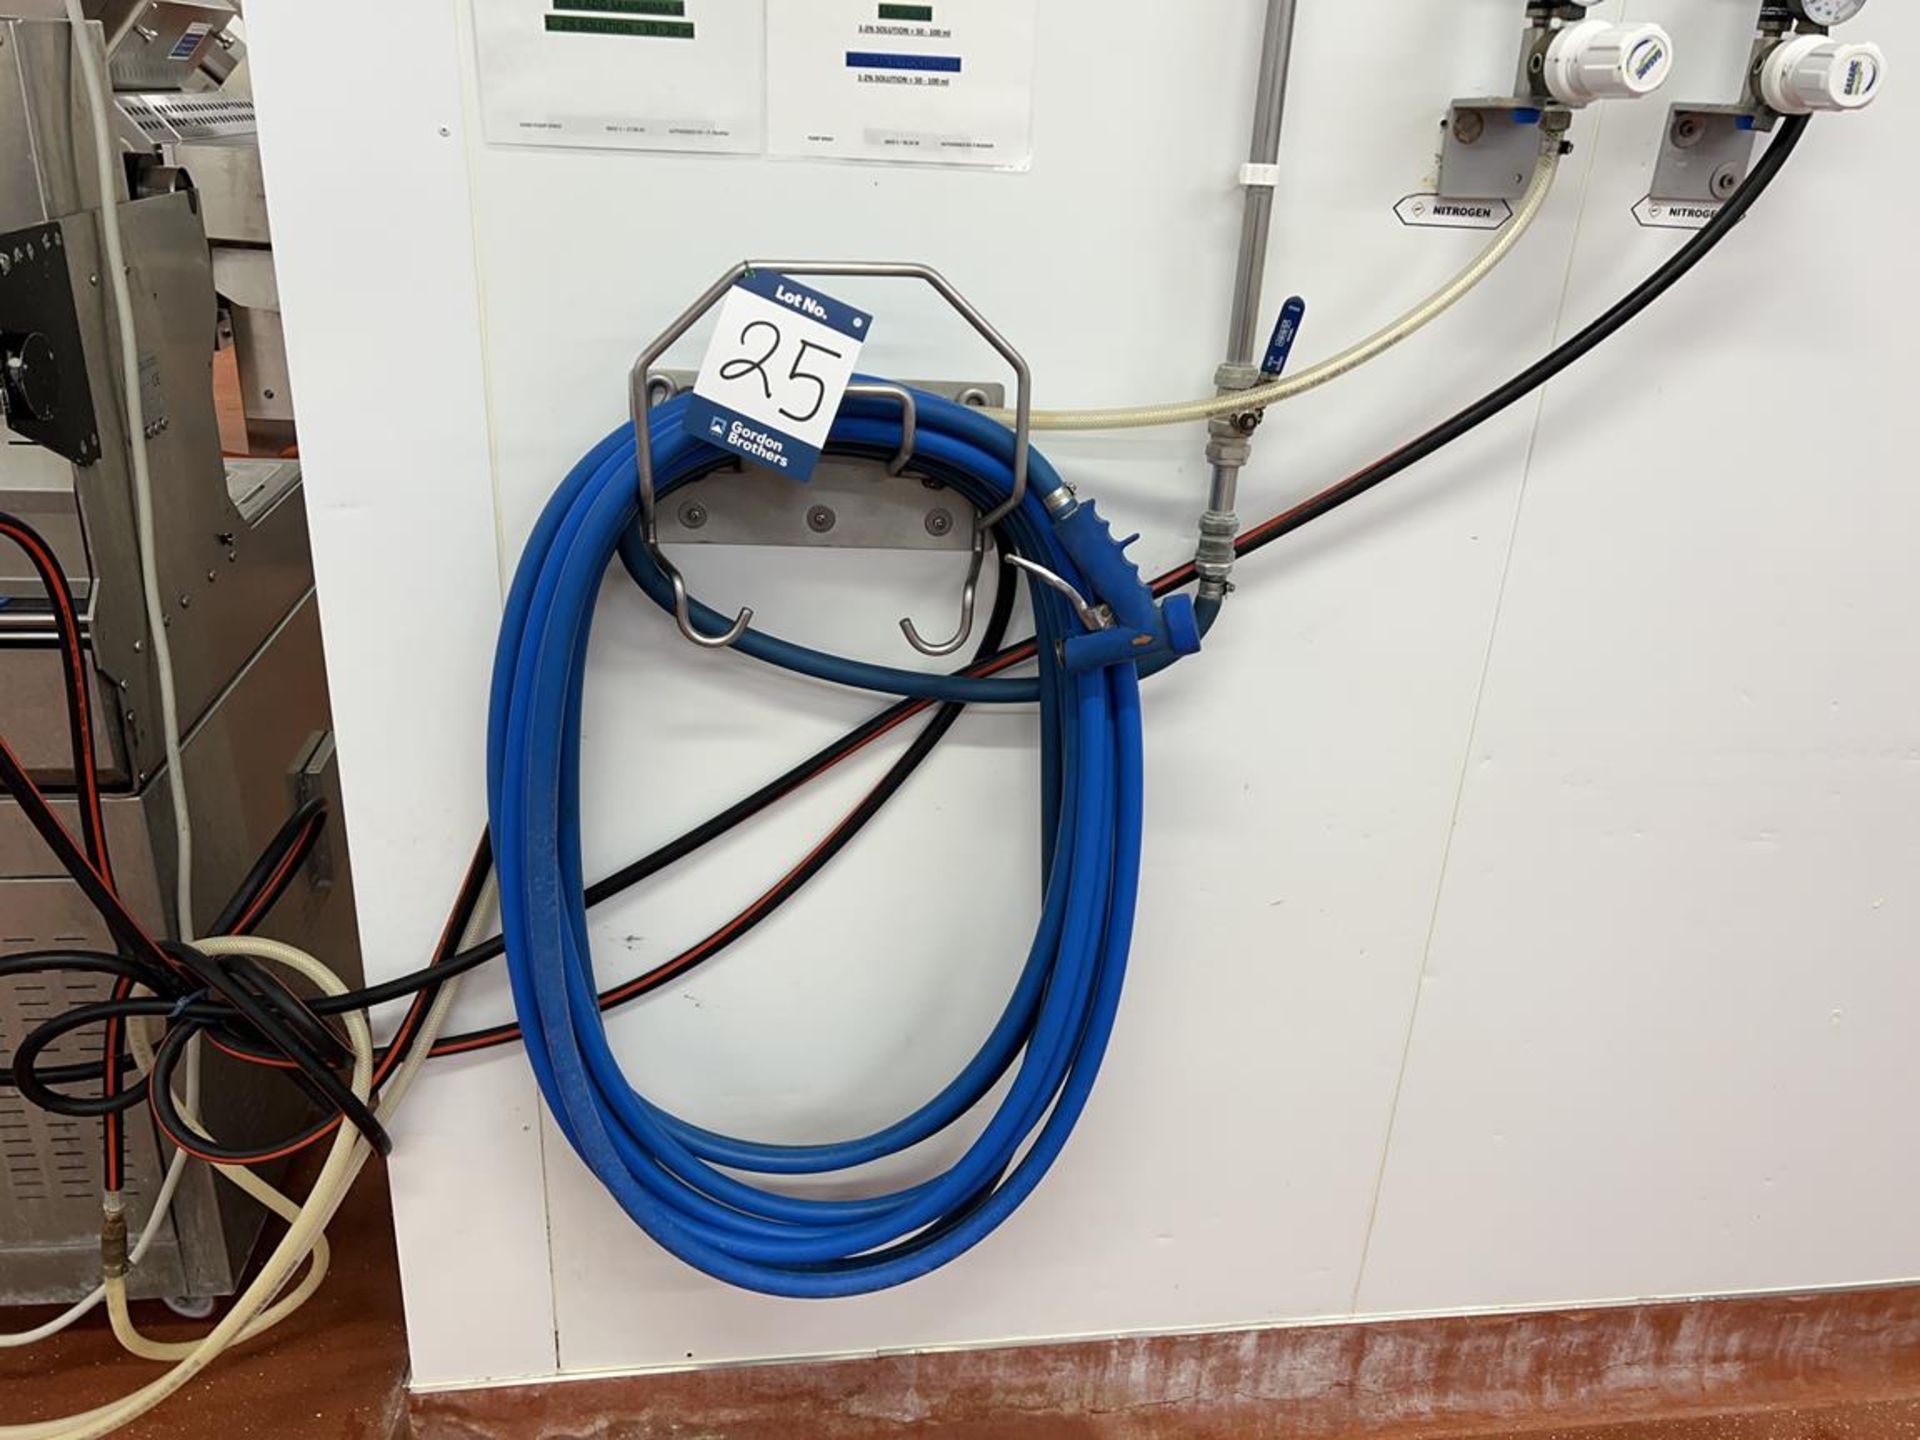 Stainless steel wall mounted hose holder and hose with spray nozzle (Hose to be disconnected at